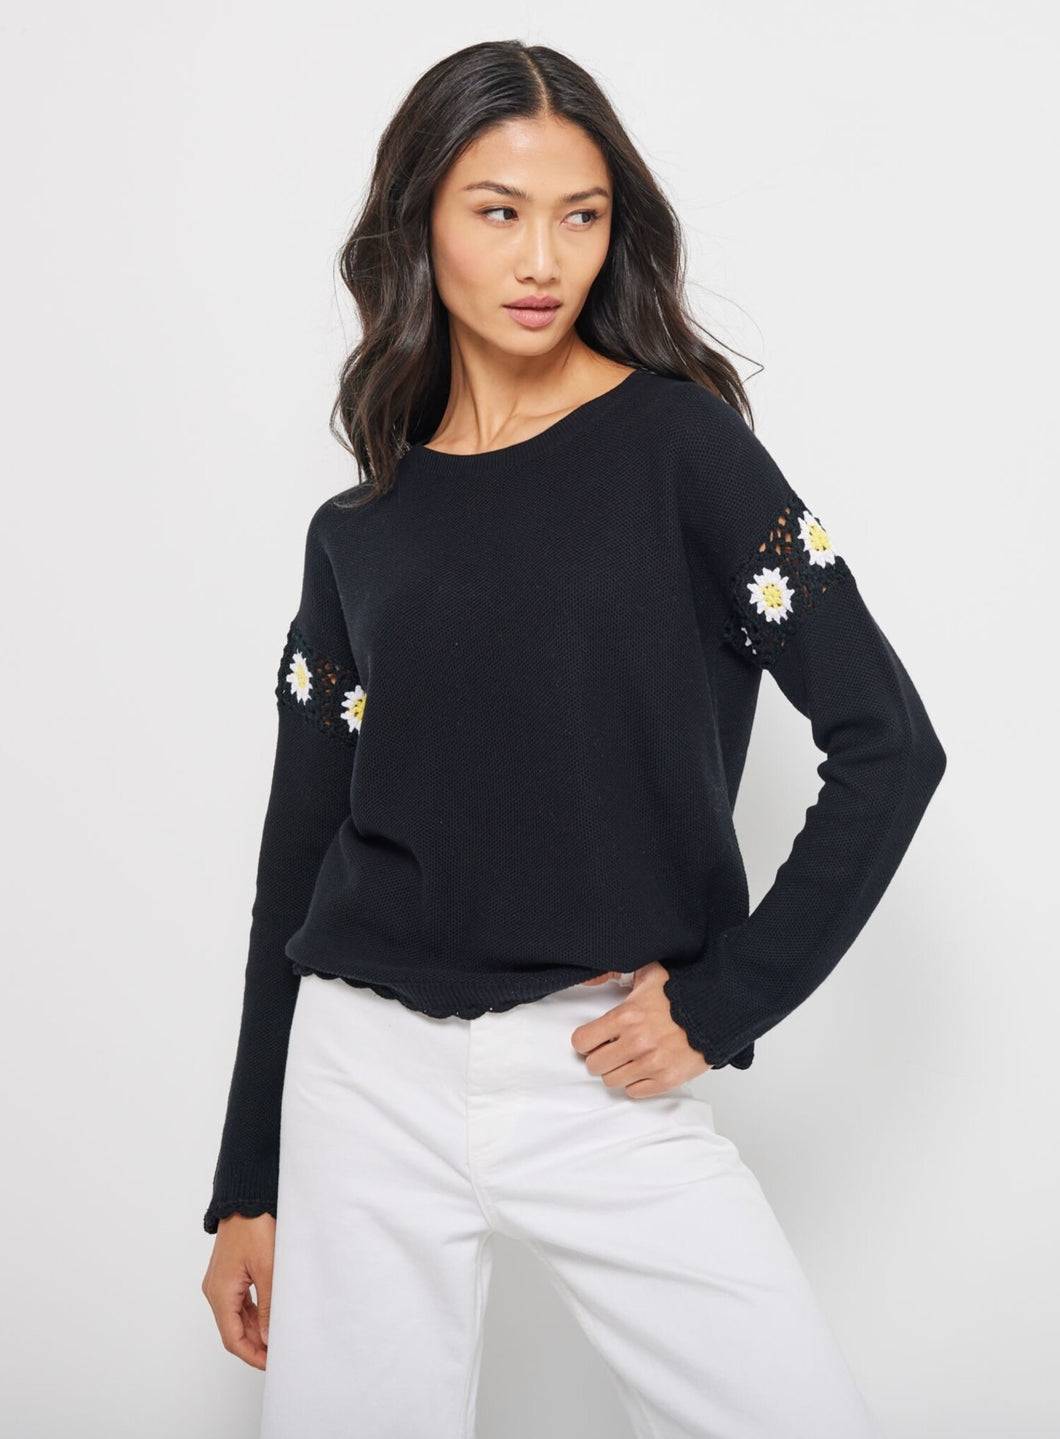 Oopsie Daisy Sweater By Lisa Todd!  *New Arrivals*